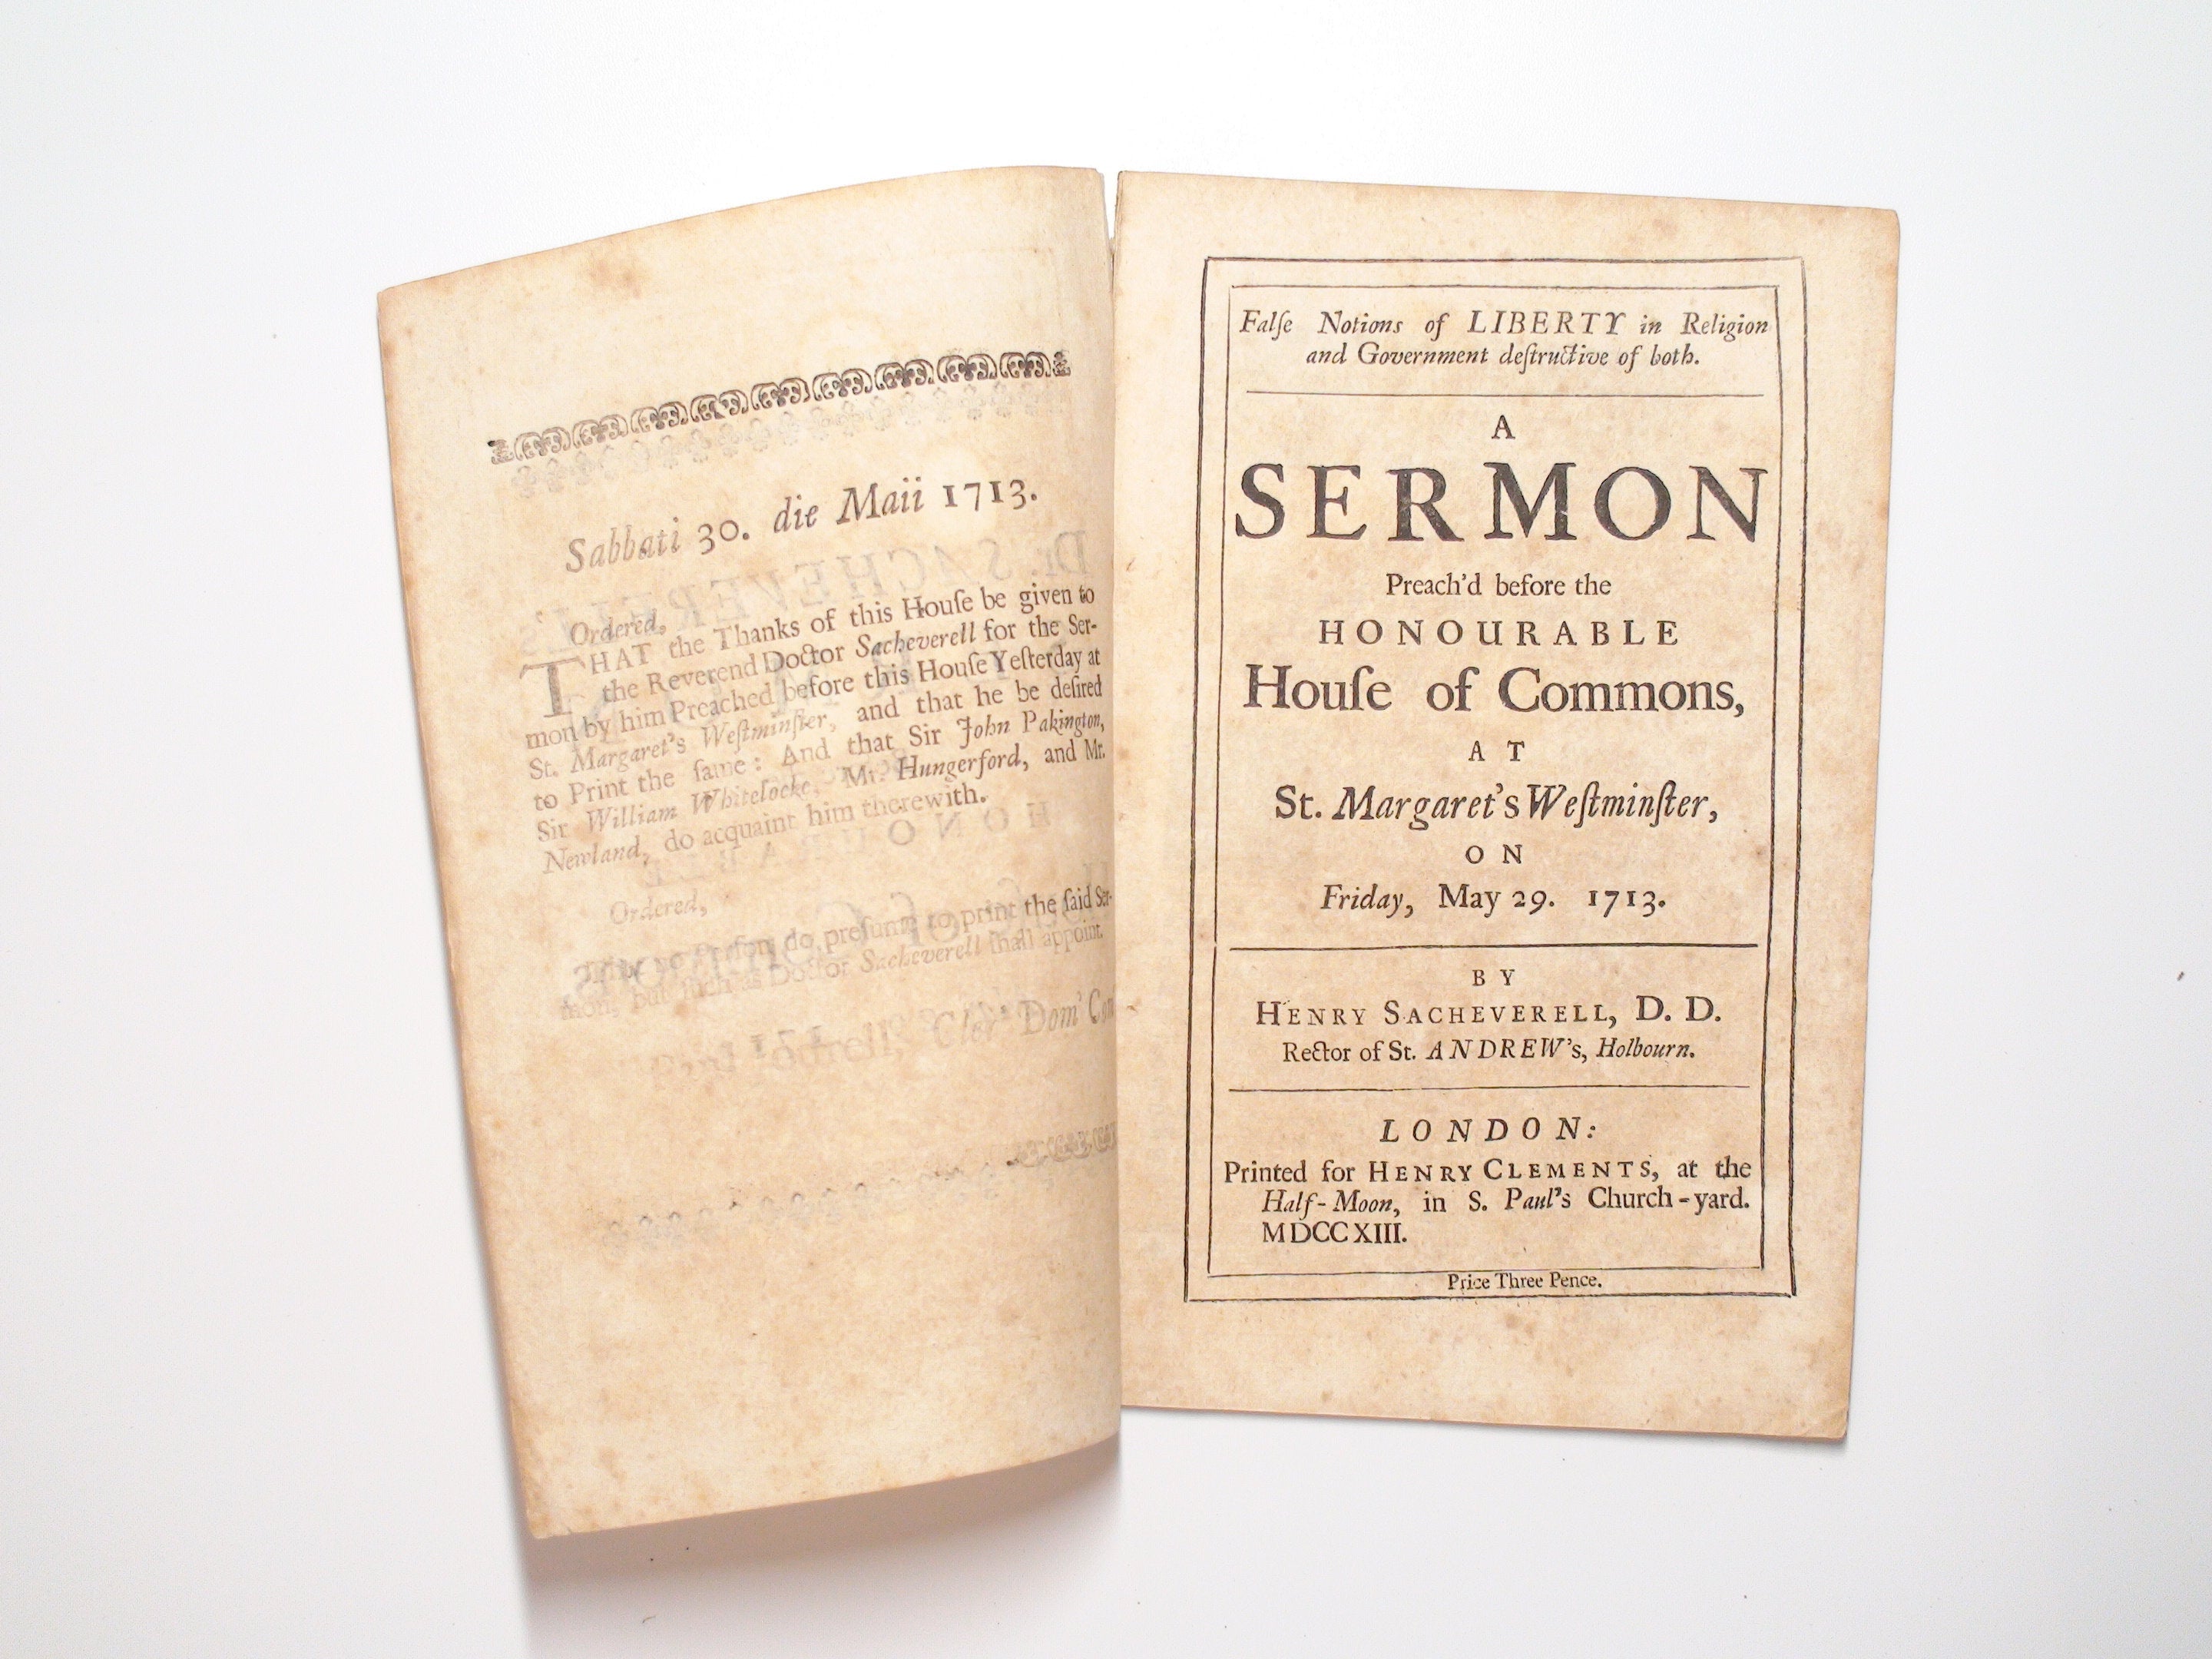 A Sermon Preach'd Before the House of Commons, Henry Sacheverell, May 29th, 1713